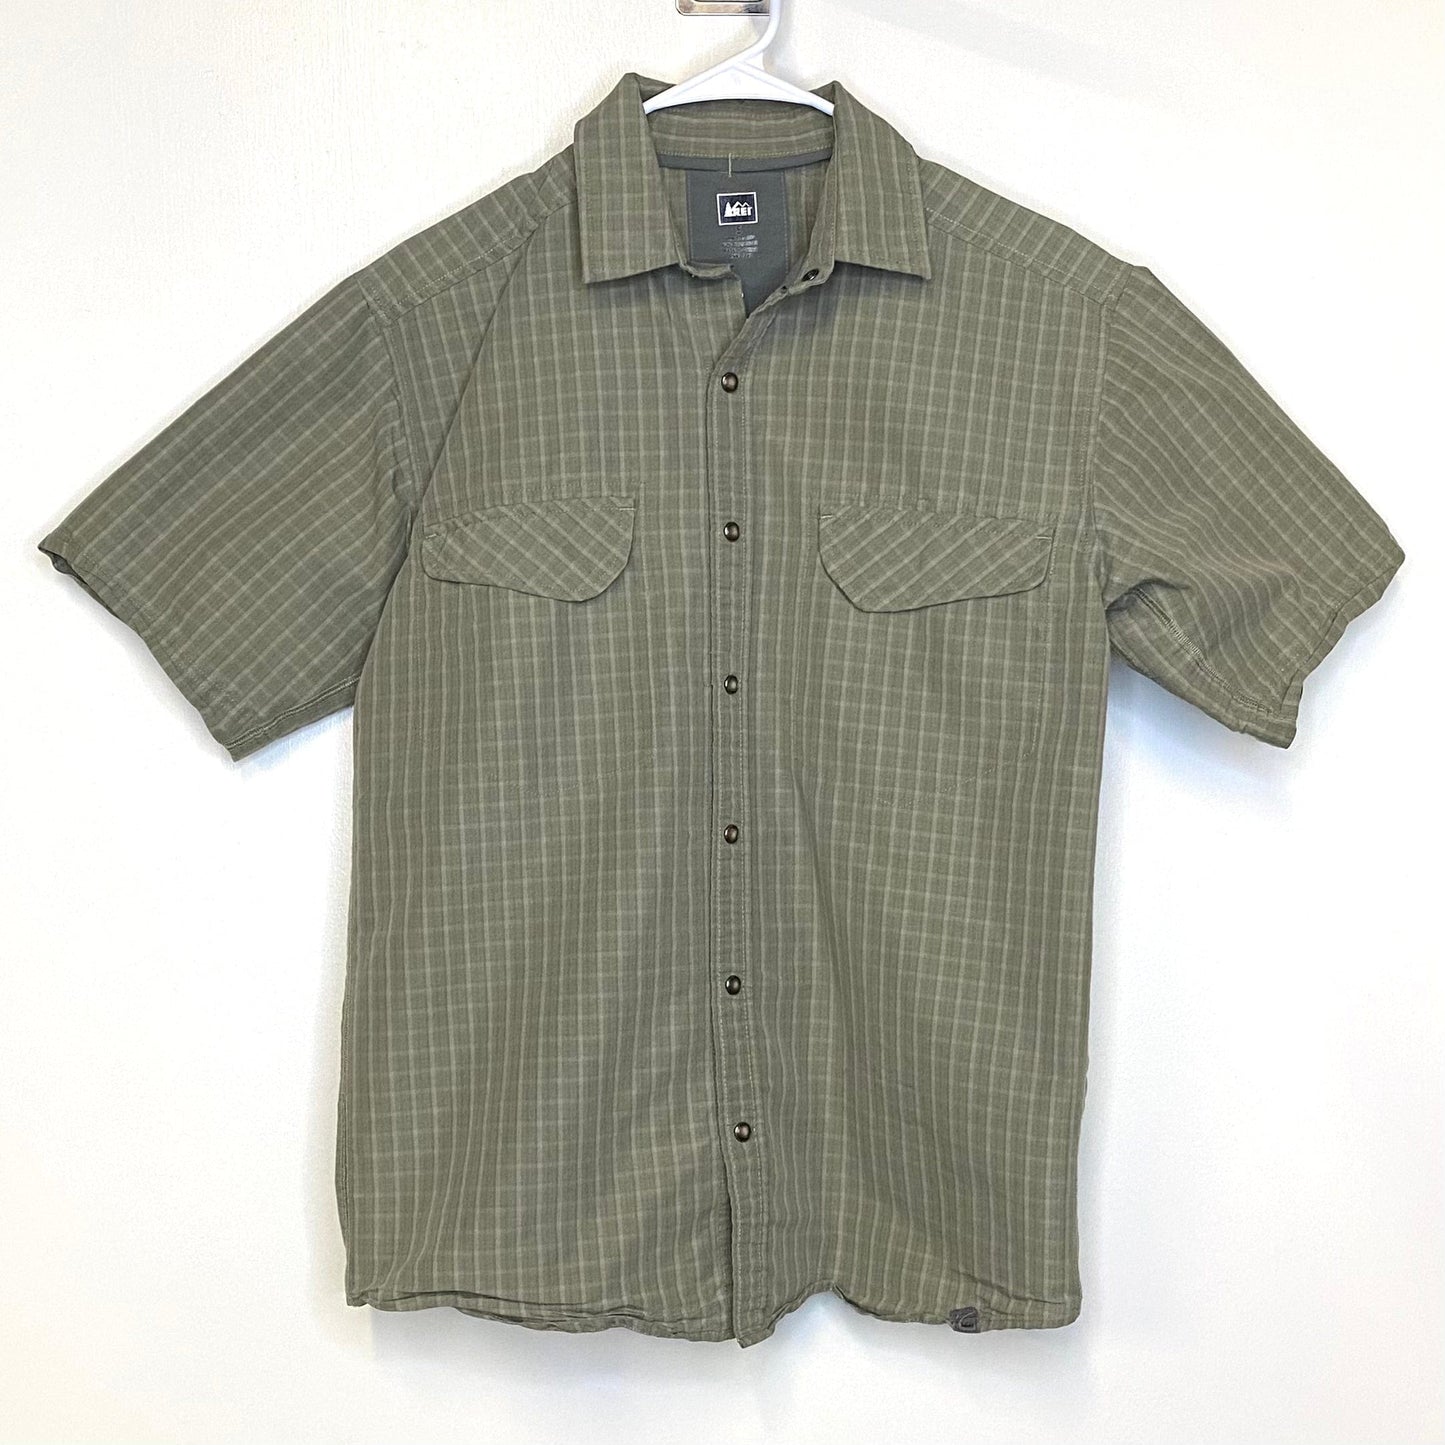 REI Mens Size S Green Casual Snap-Up Shirt S/s Lightweight Breathable